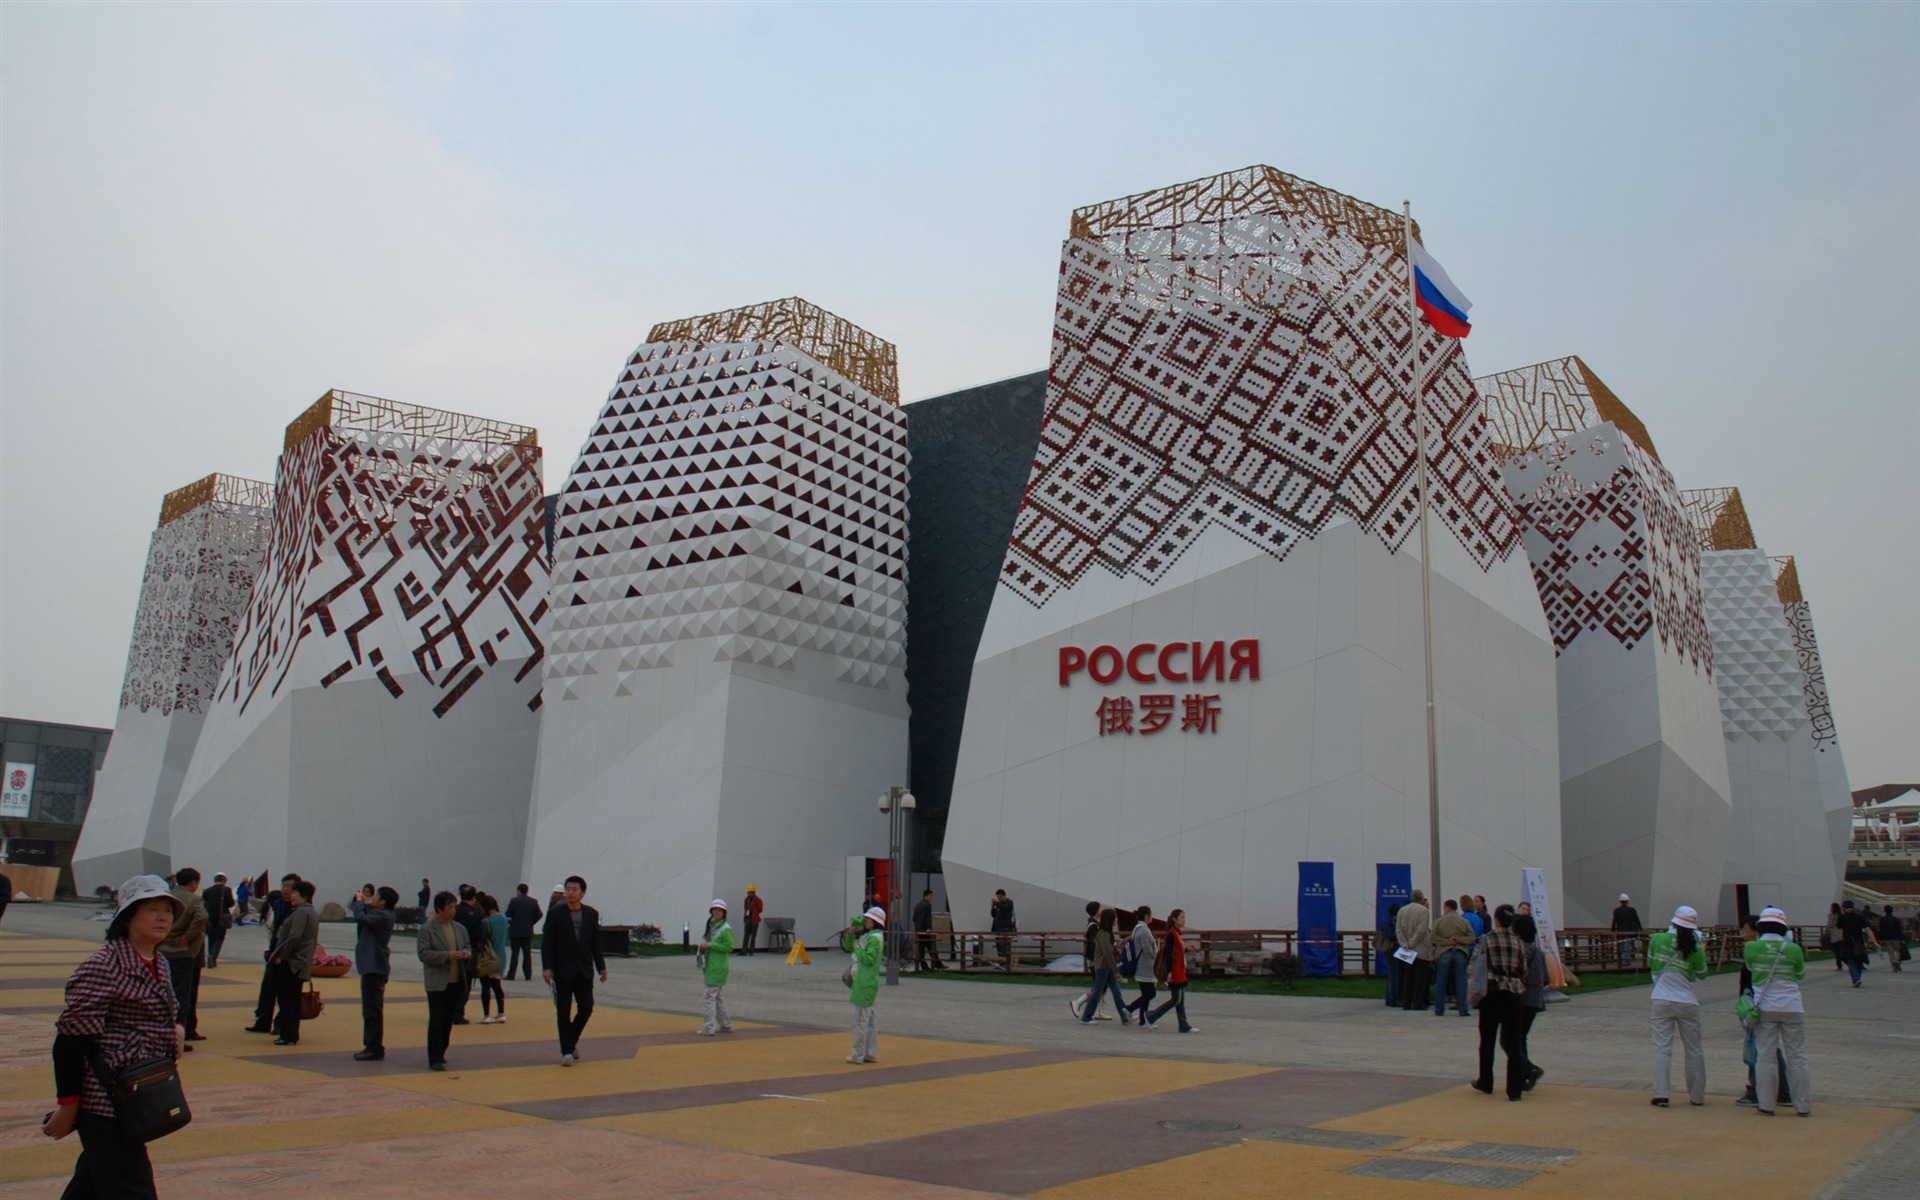 Commissioning of the 2010 Shanghai World Expo (studious works) #20 - 1920x1200